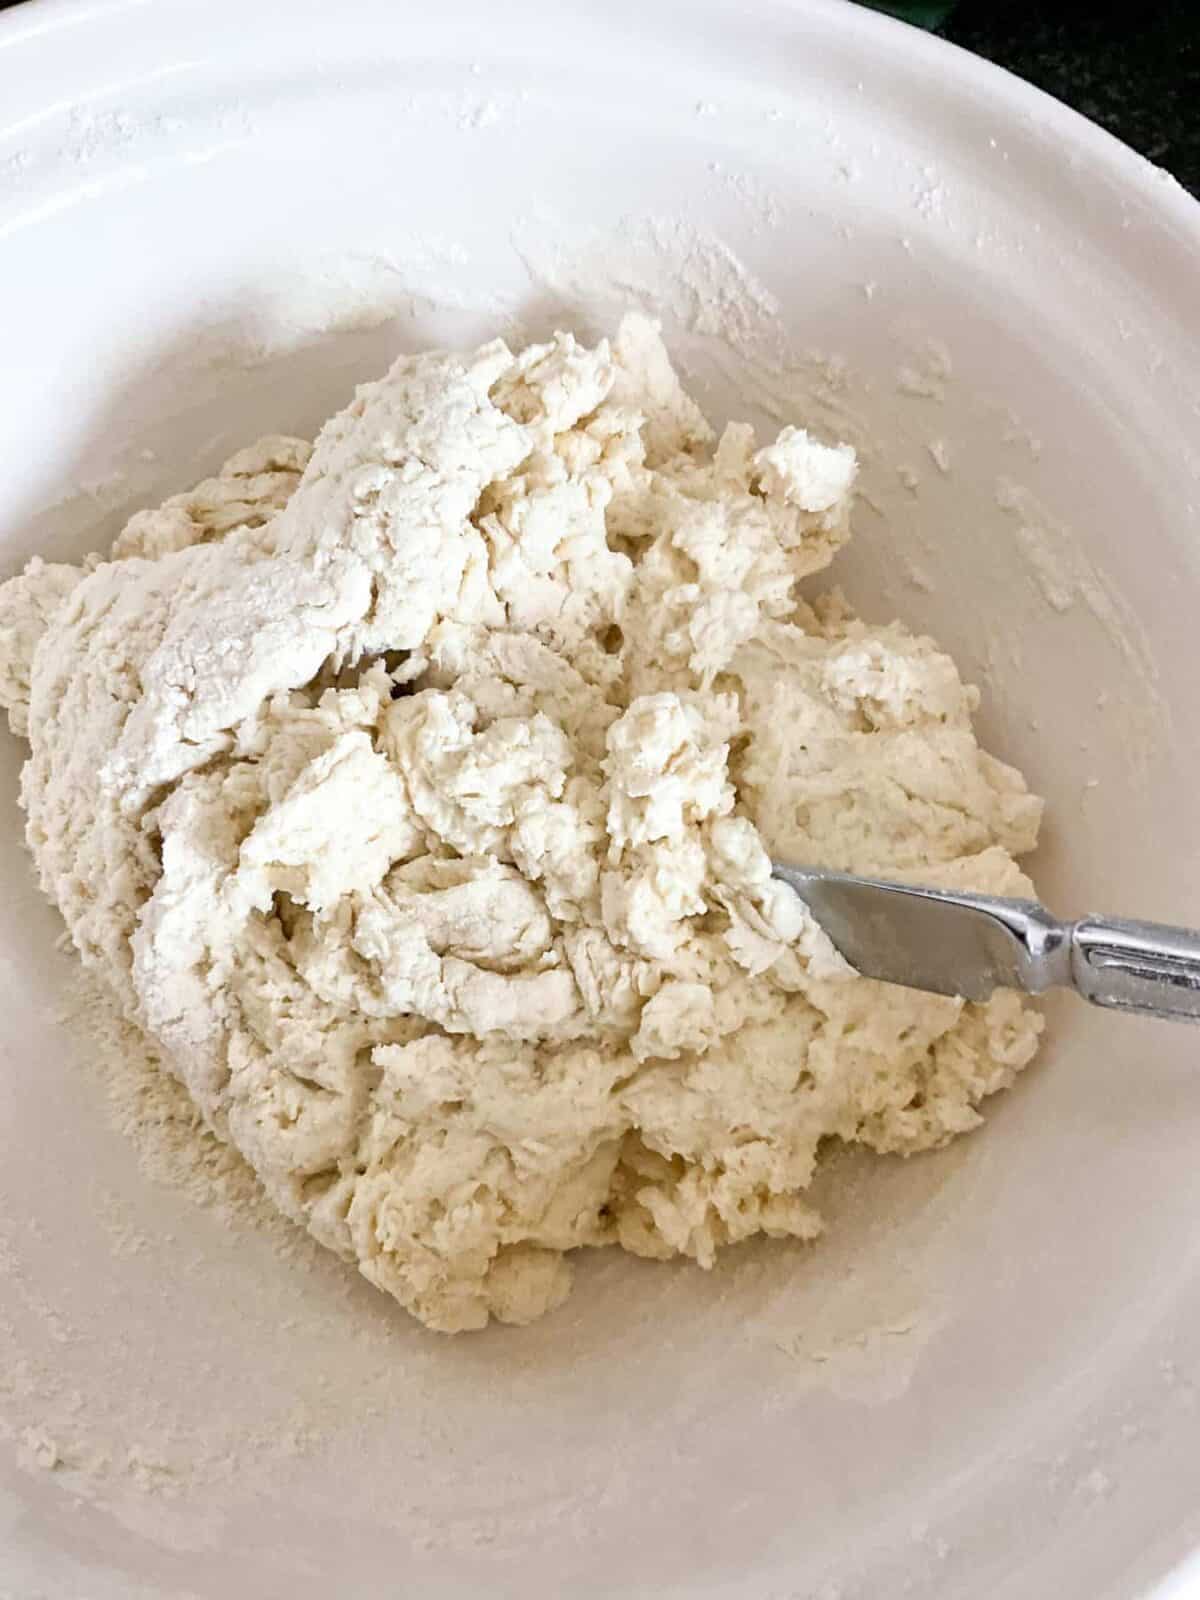 Bread ingredients mixed together to form a dough.